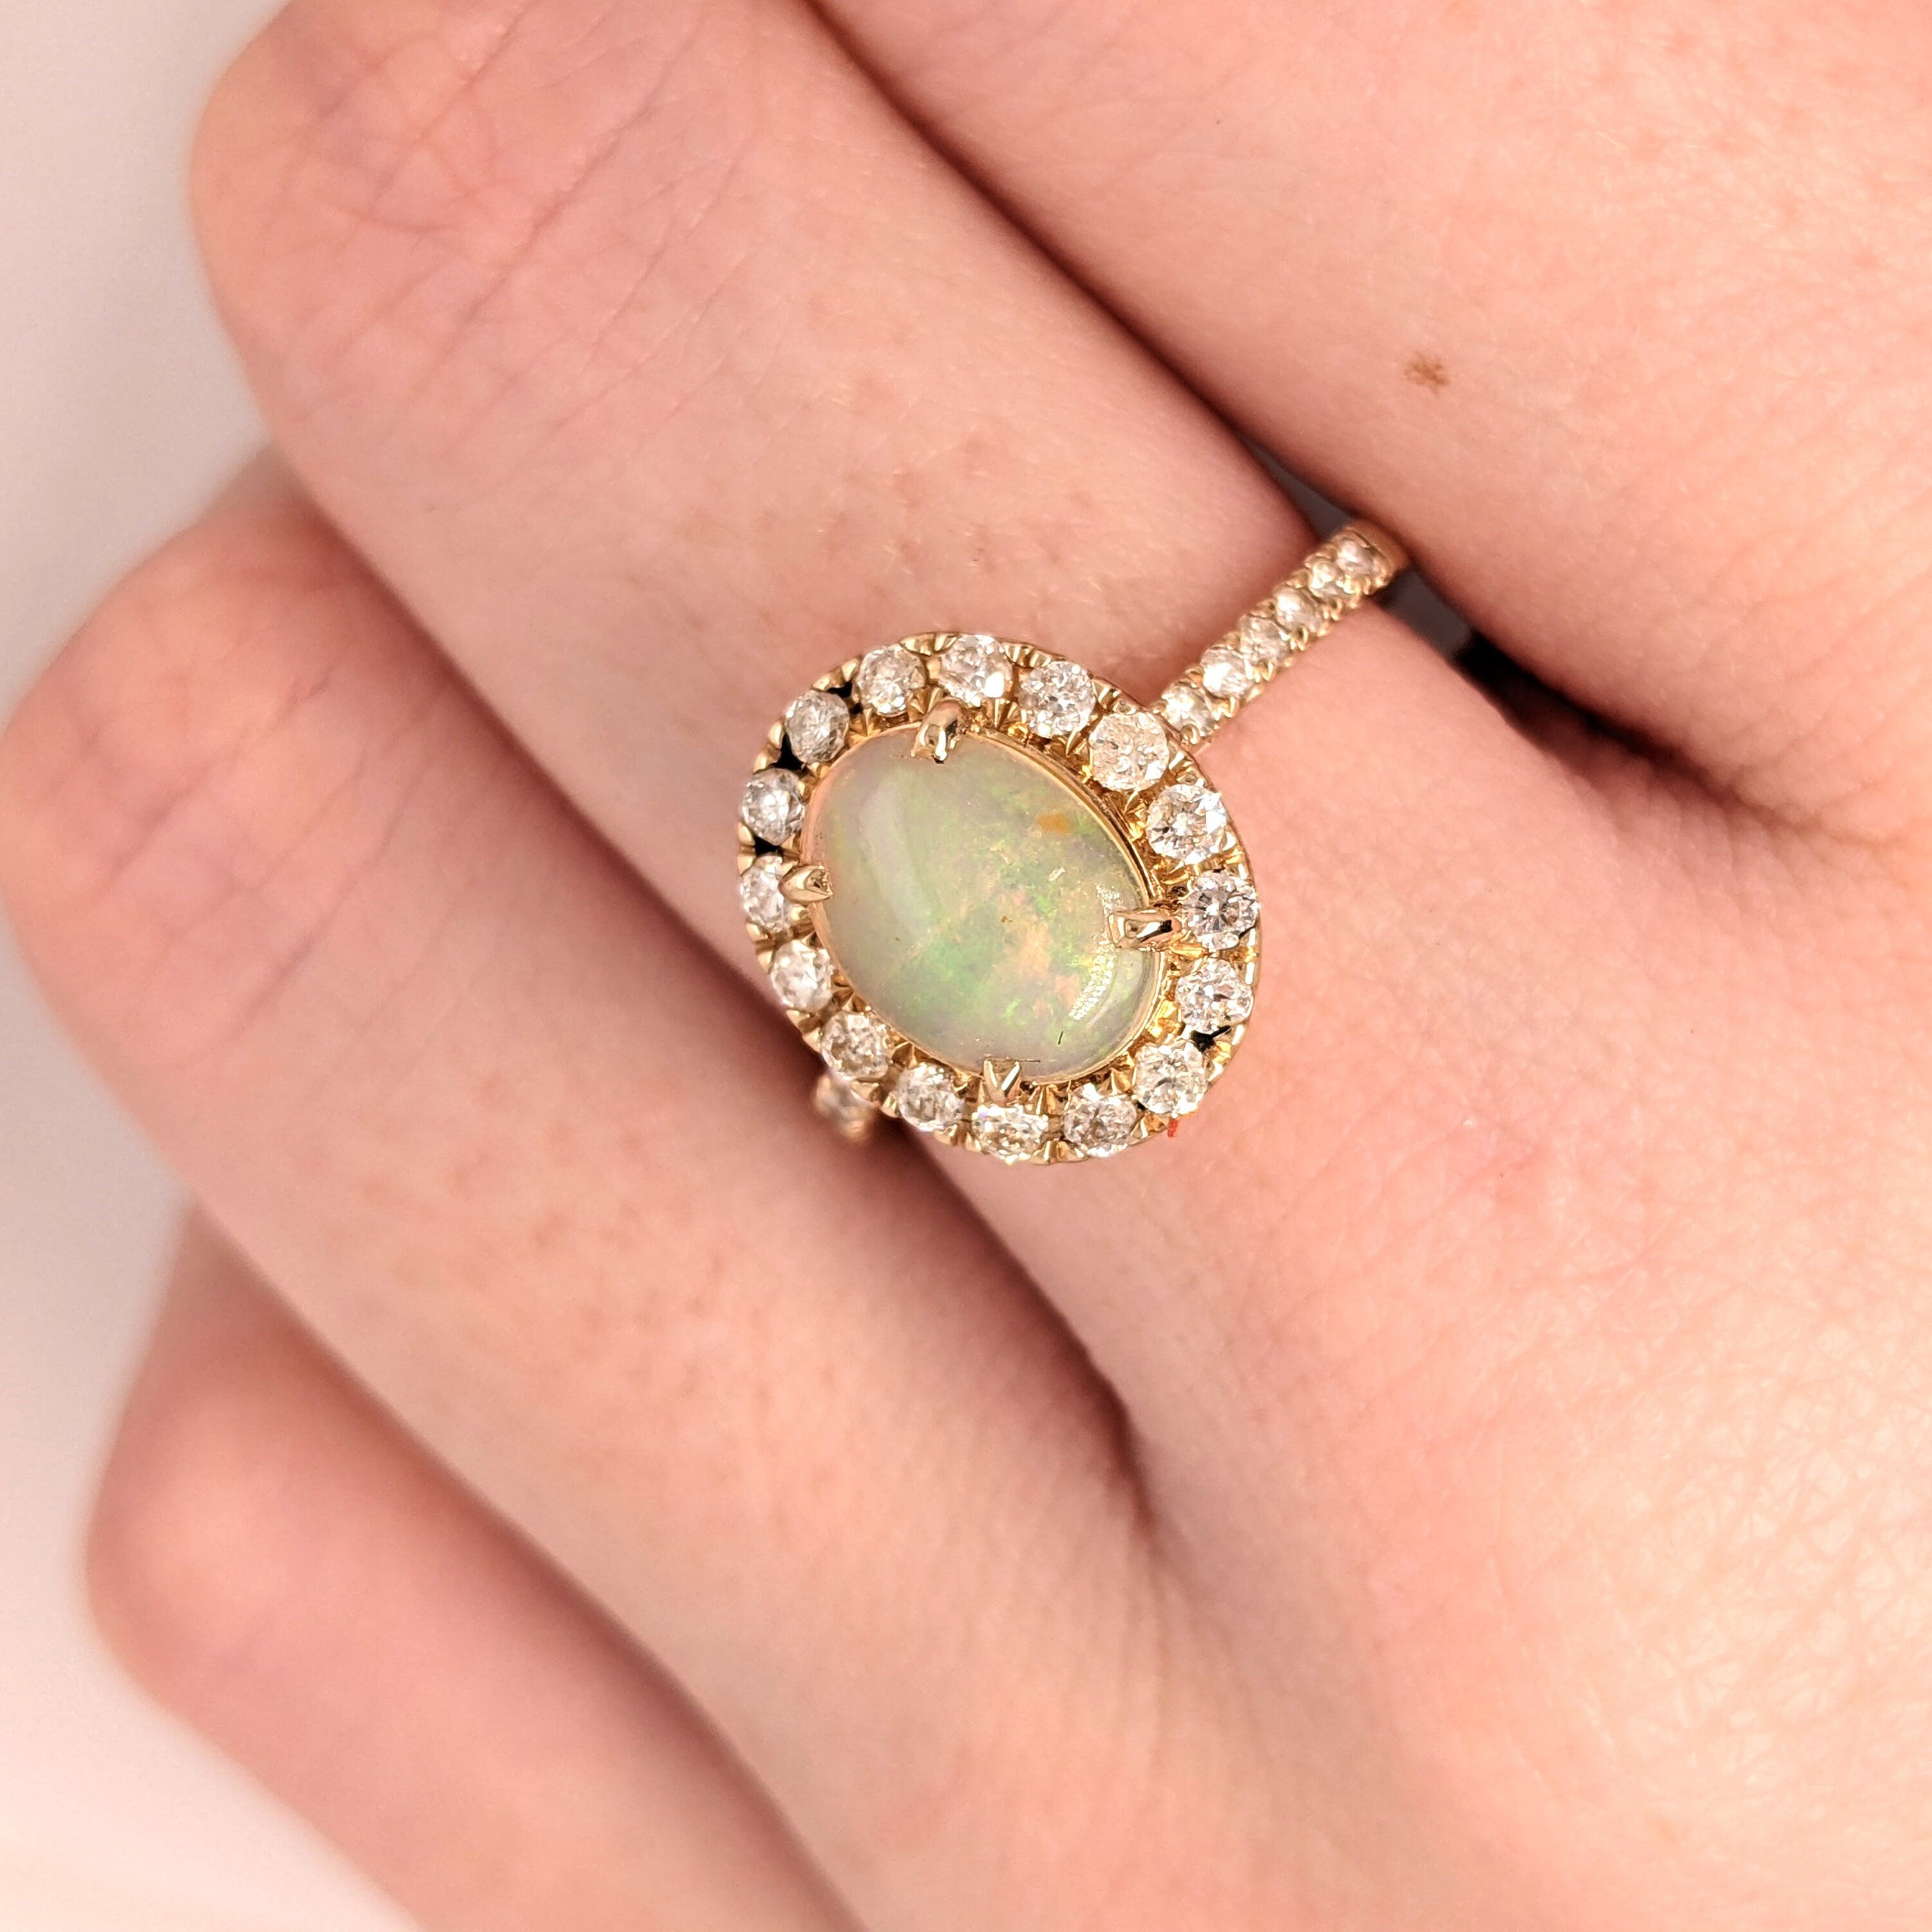 Beautiful Ethiopian Opal Ring with 14k Solid Yellow Gold and All Natural Diamond Halo | Oval 7x5 mm | Rainbow Gemstone | Unique Jewelry Gift